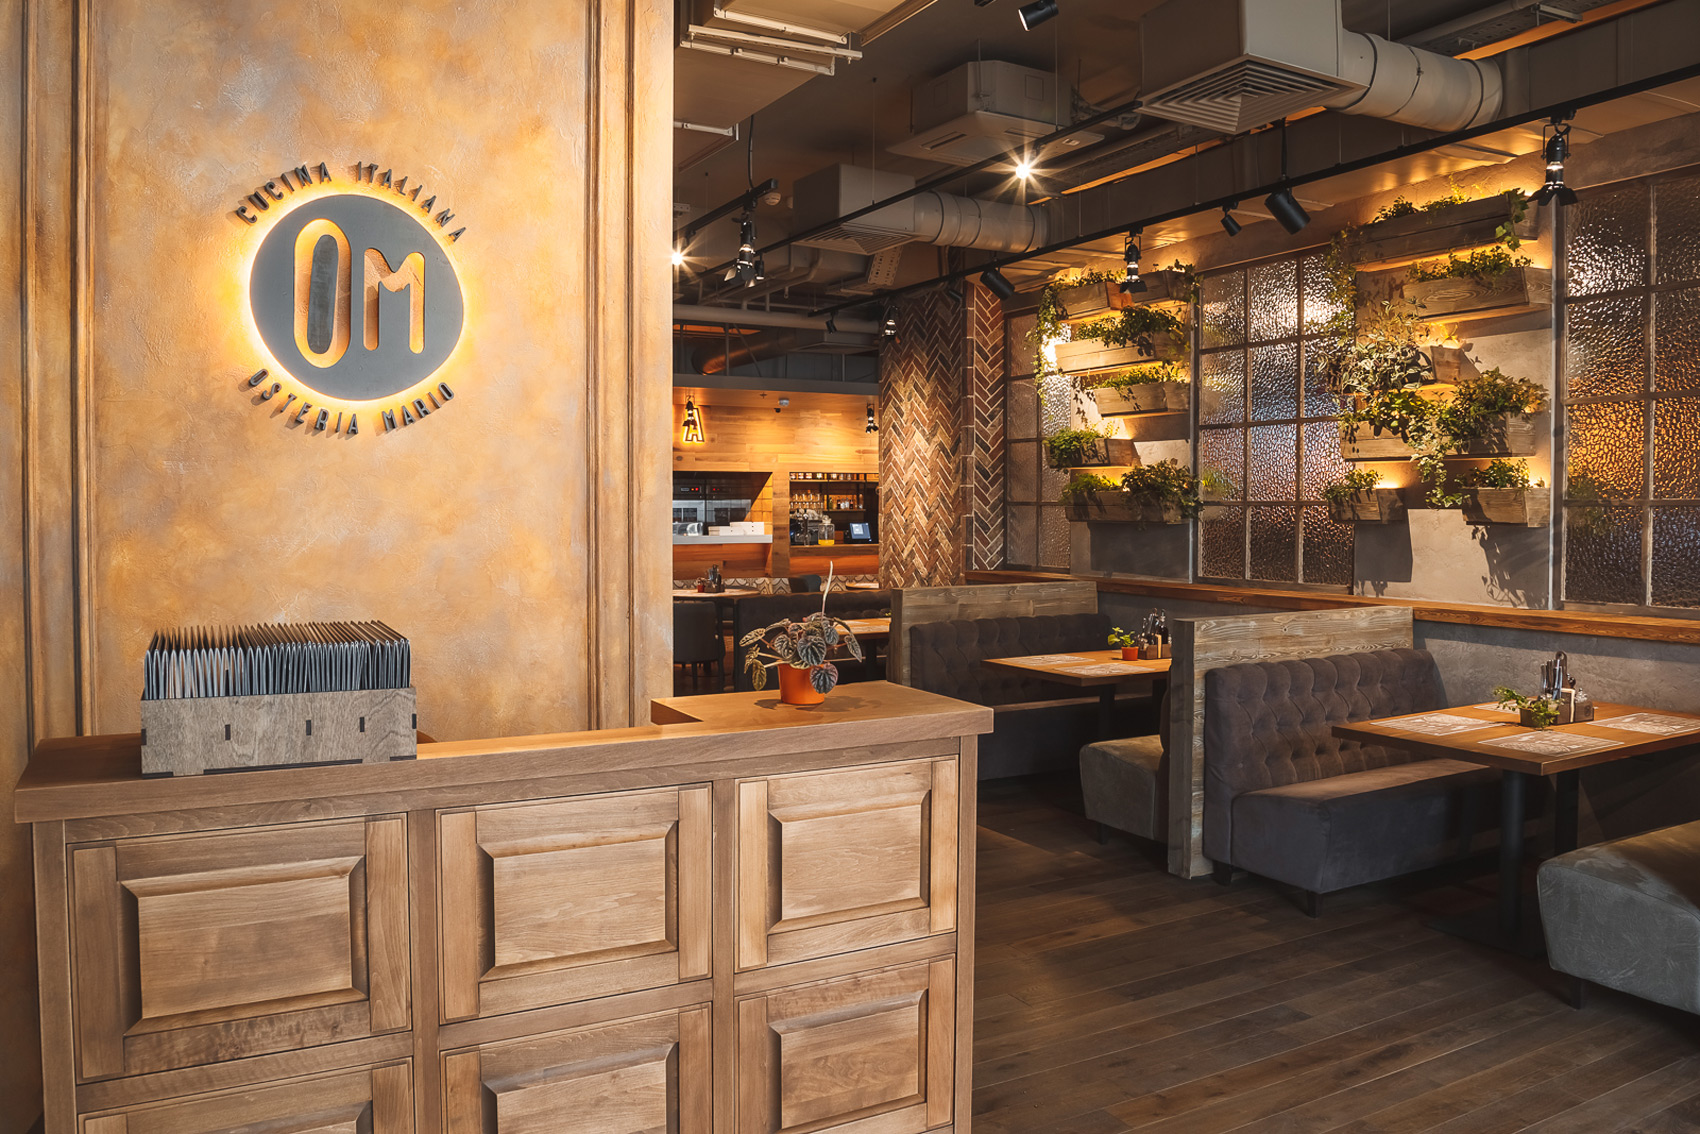 «Osteria Mario» restaurant has become a new tenant in «Citydel» business center